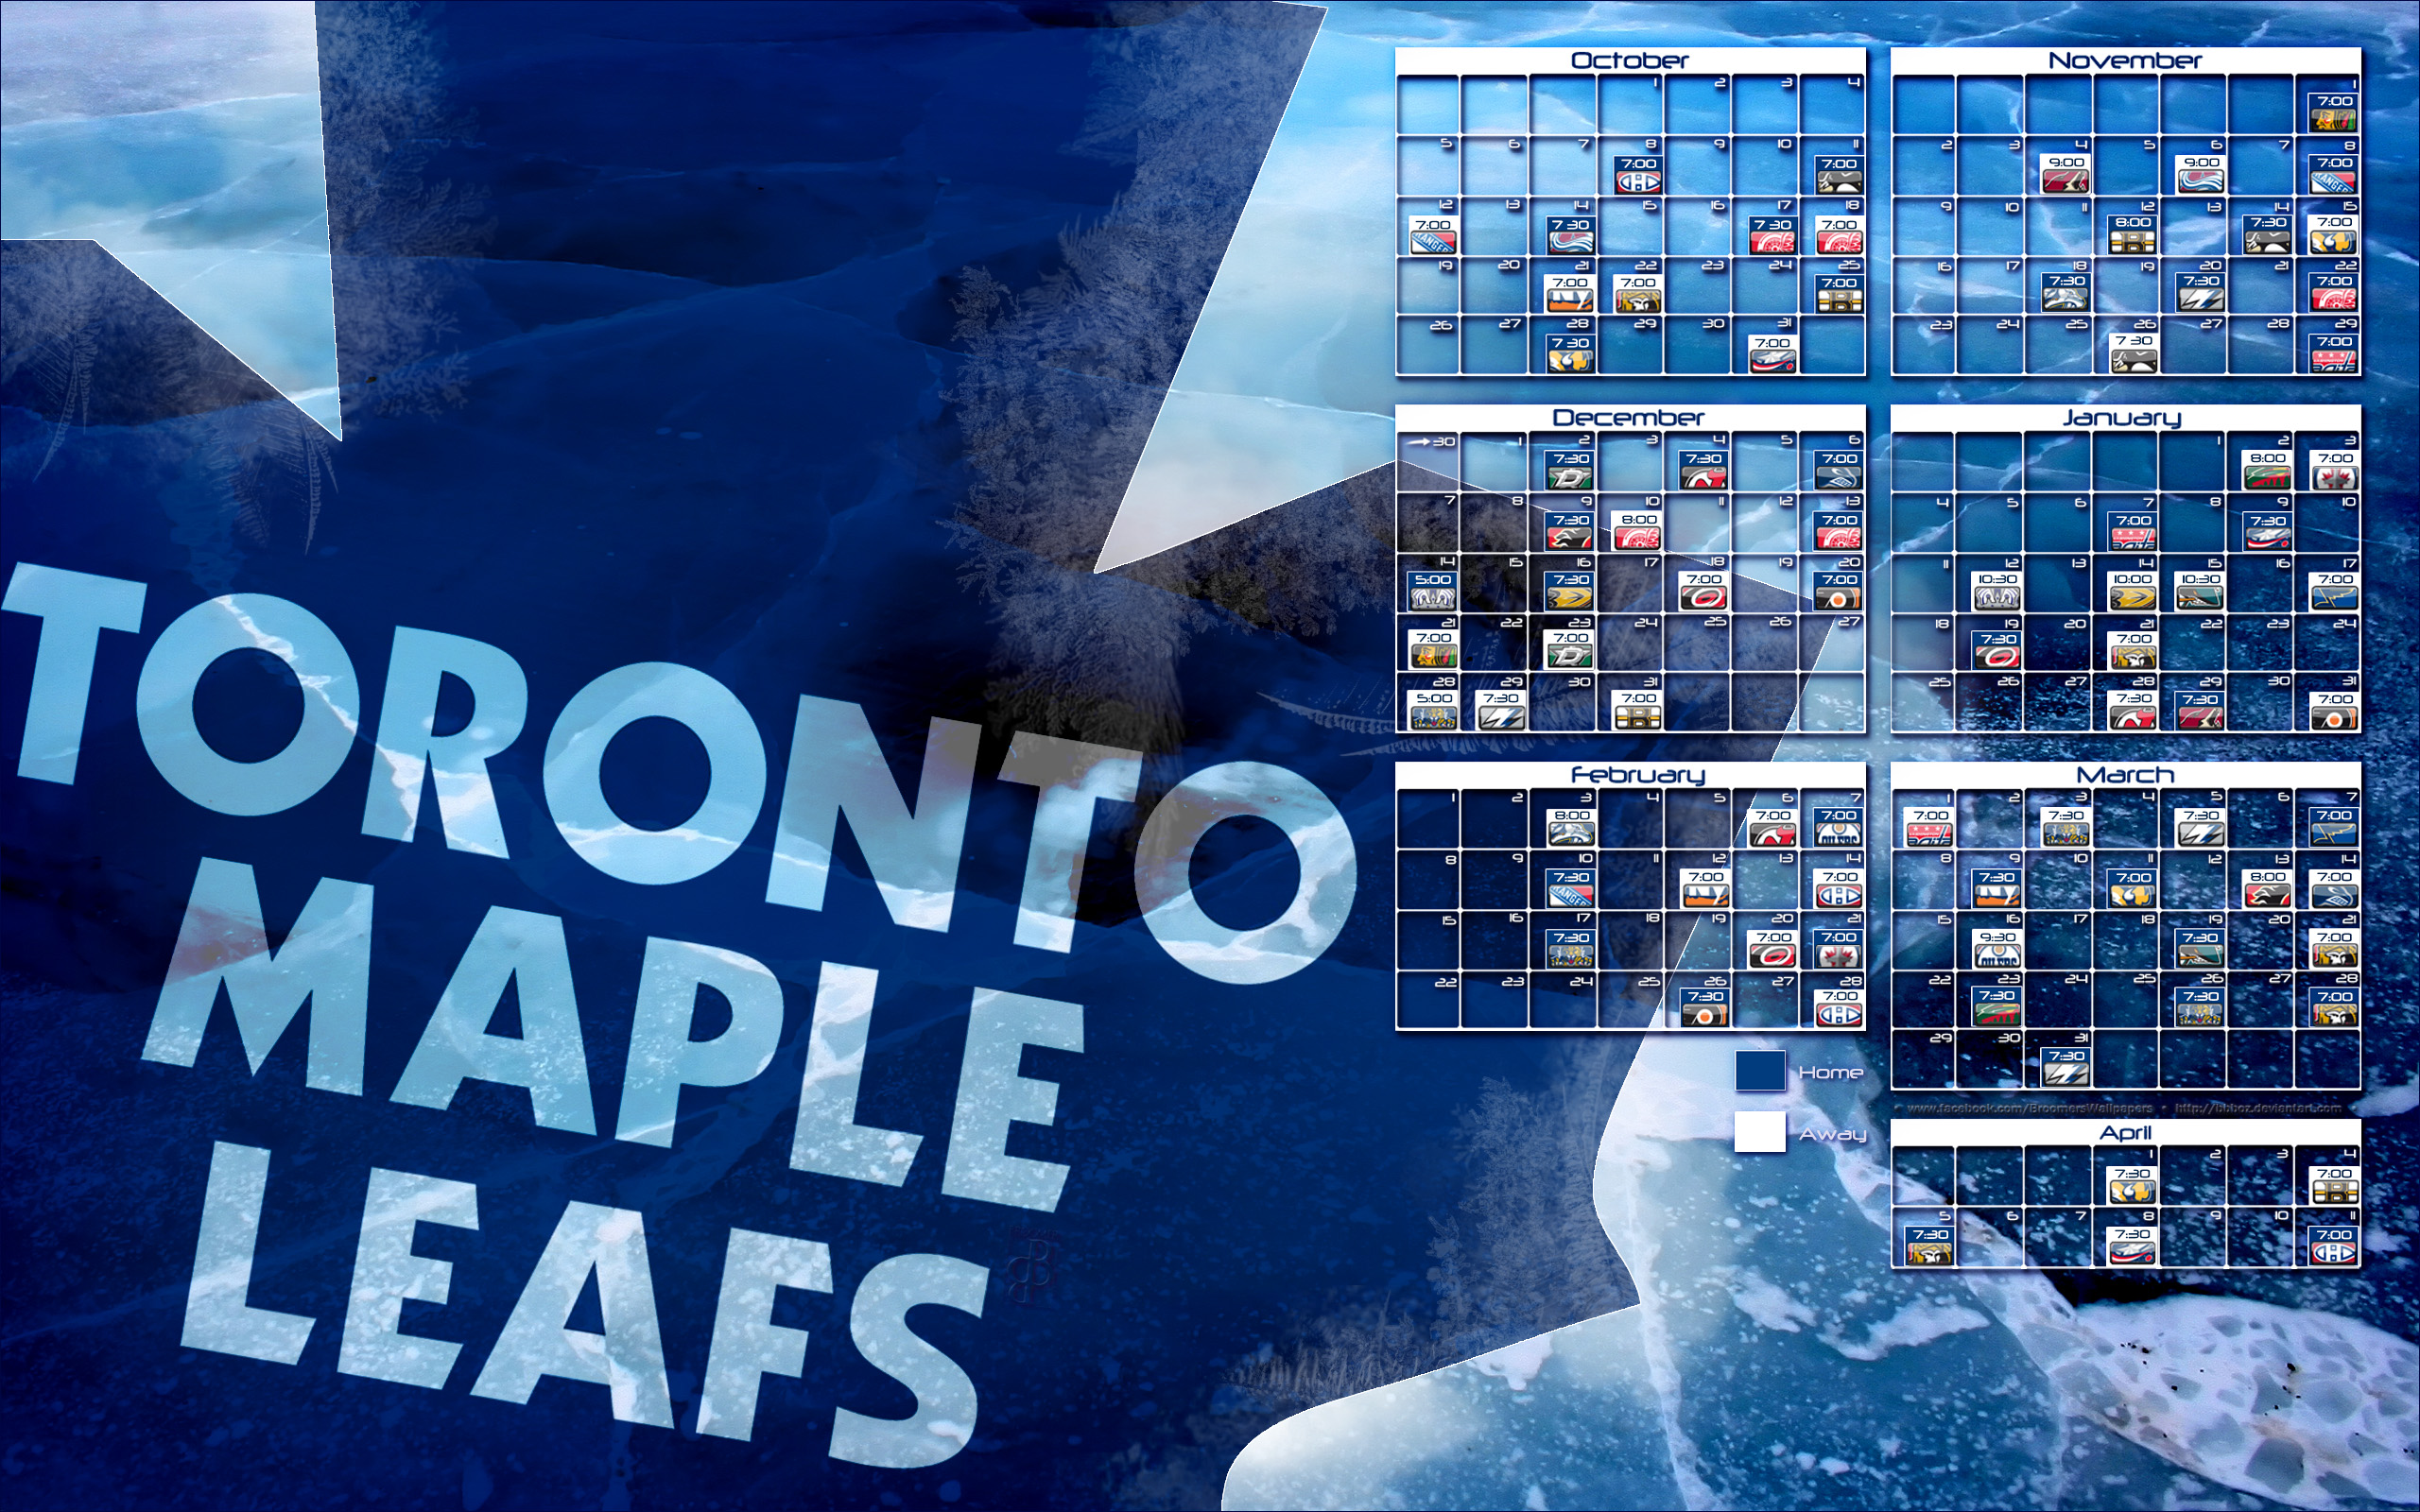 Toronto Maple Leafs Image Crazy Gallery